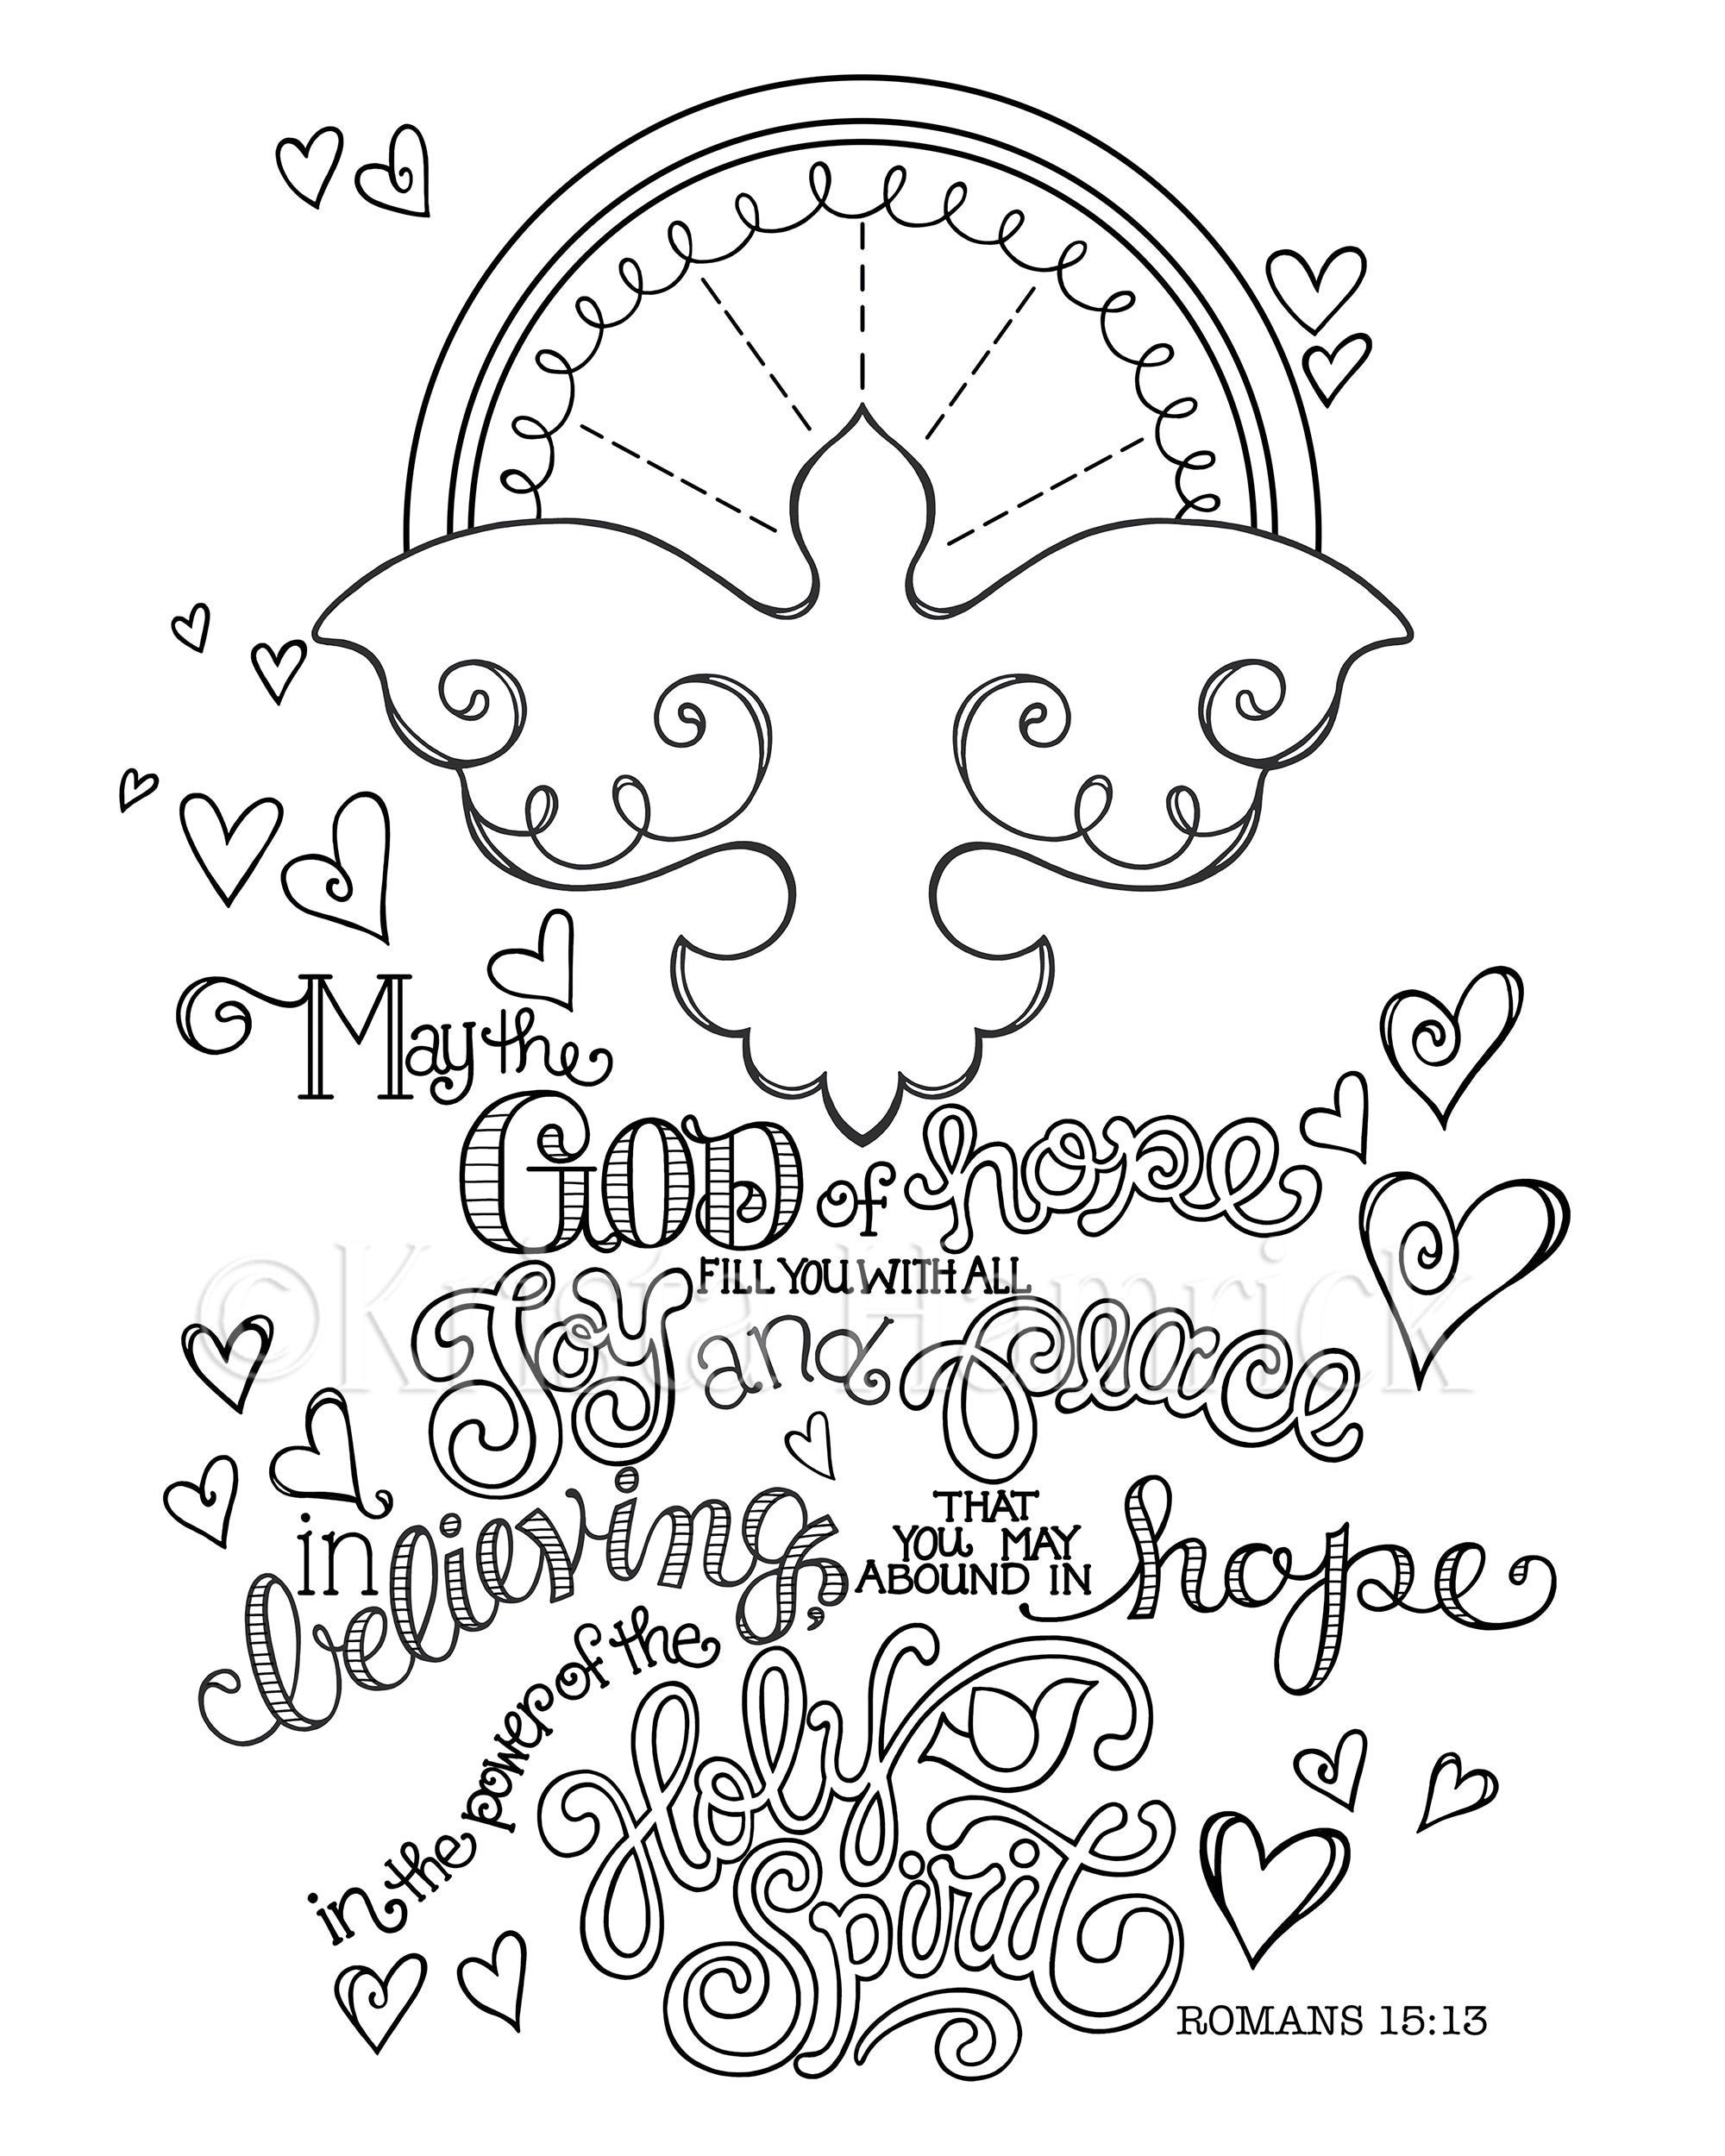 Hope in the holy spirit romans coloring page and bookmarks instant download